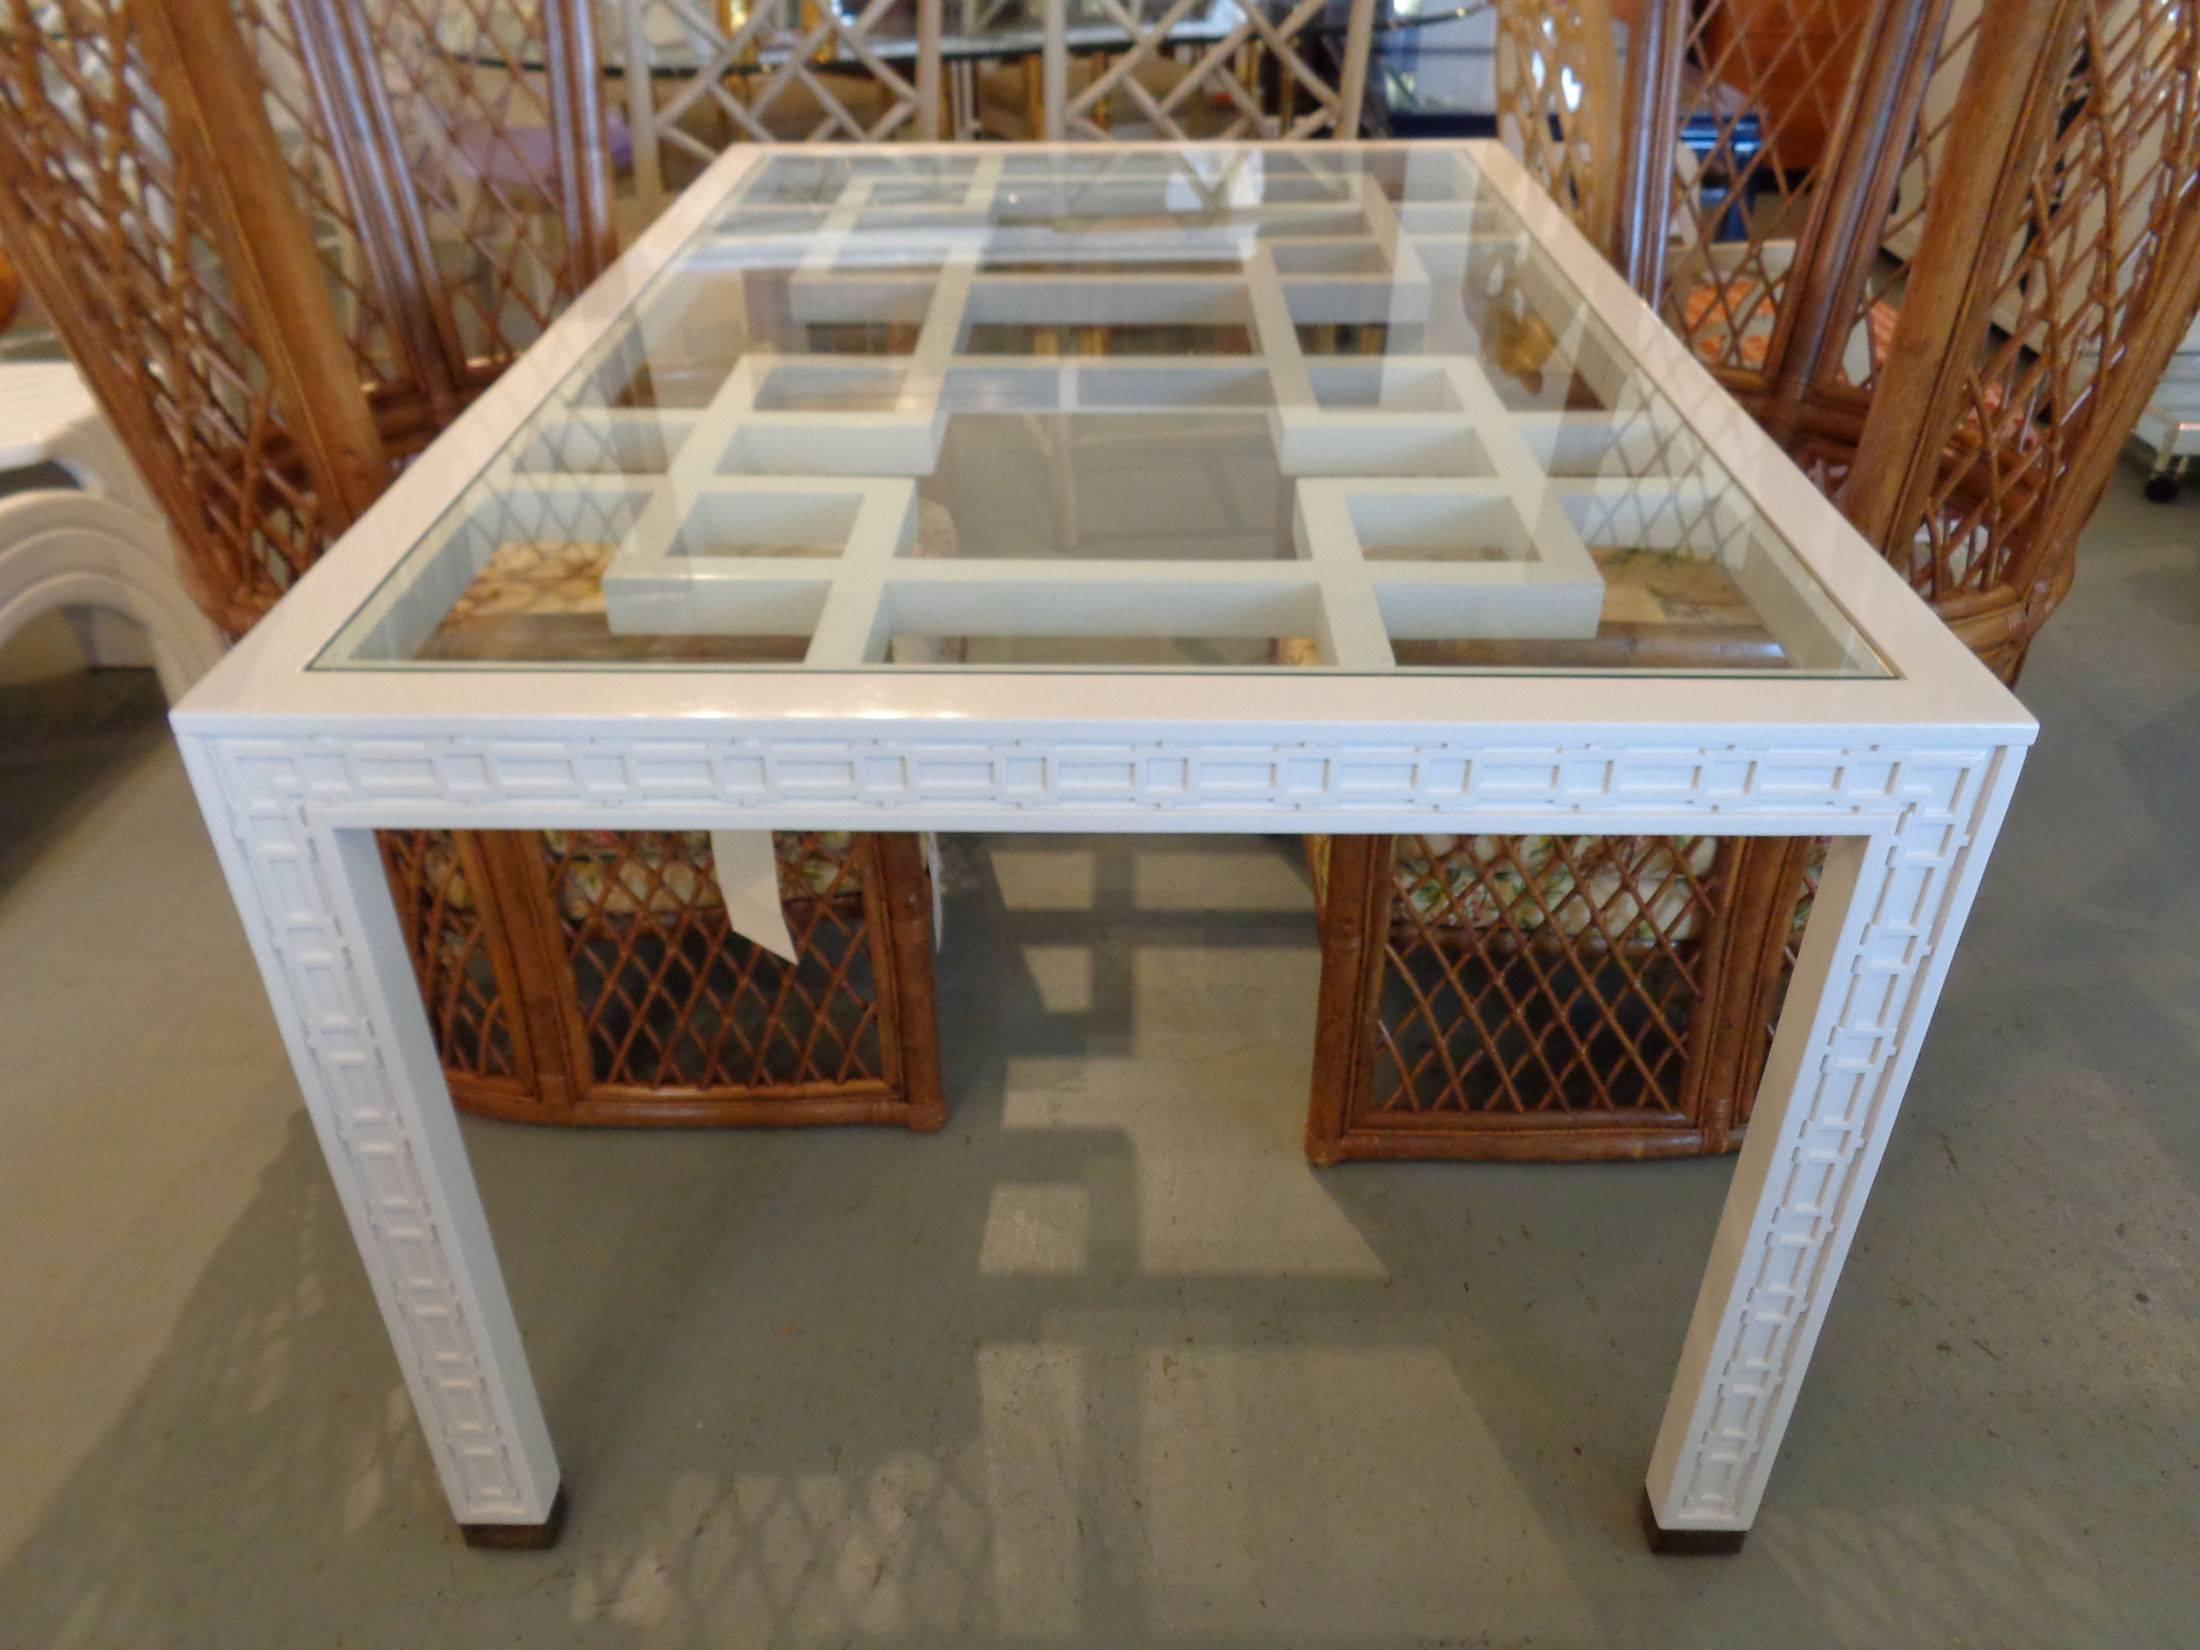 Fretwork dining table with inset glass top in nice as found vintage condition. There are minor imperfections to the newly lacquered finish. Patina to brass caps.